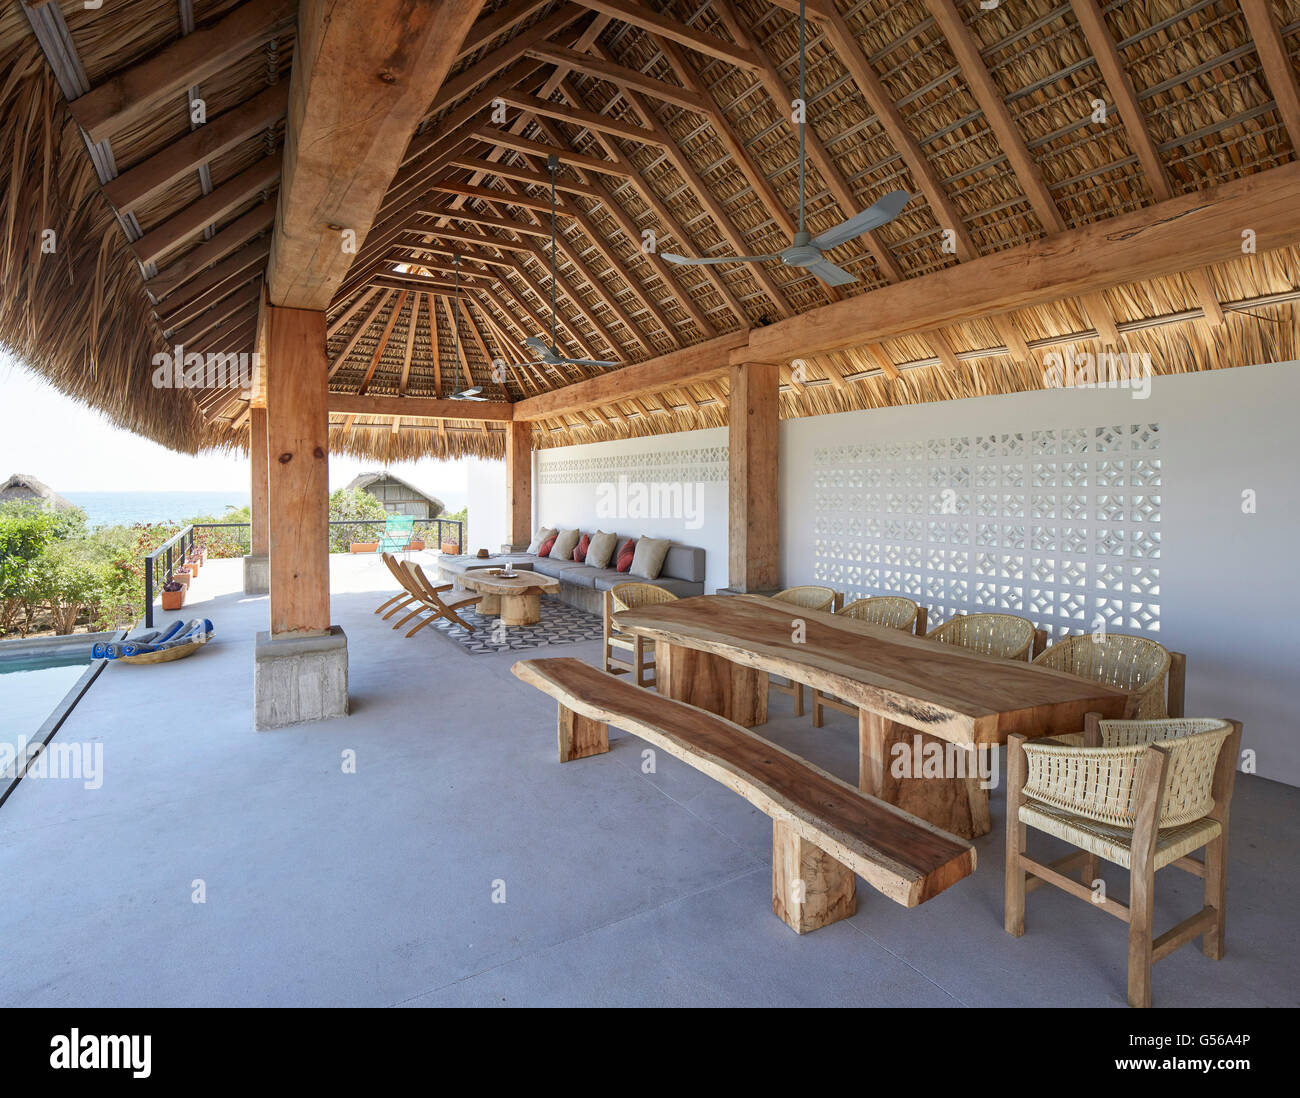 Covered area on upper level from under palapa. Casa Cal, Puerto Escondido, Mexico. Architect: BAAQ, 2015. Stock Photo